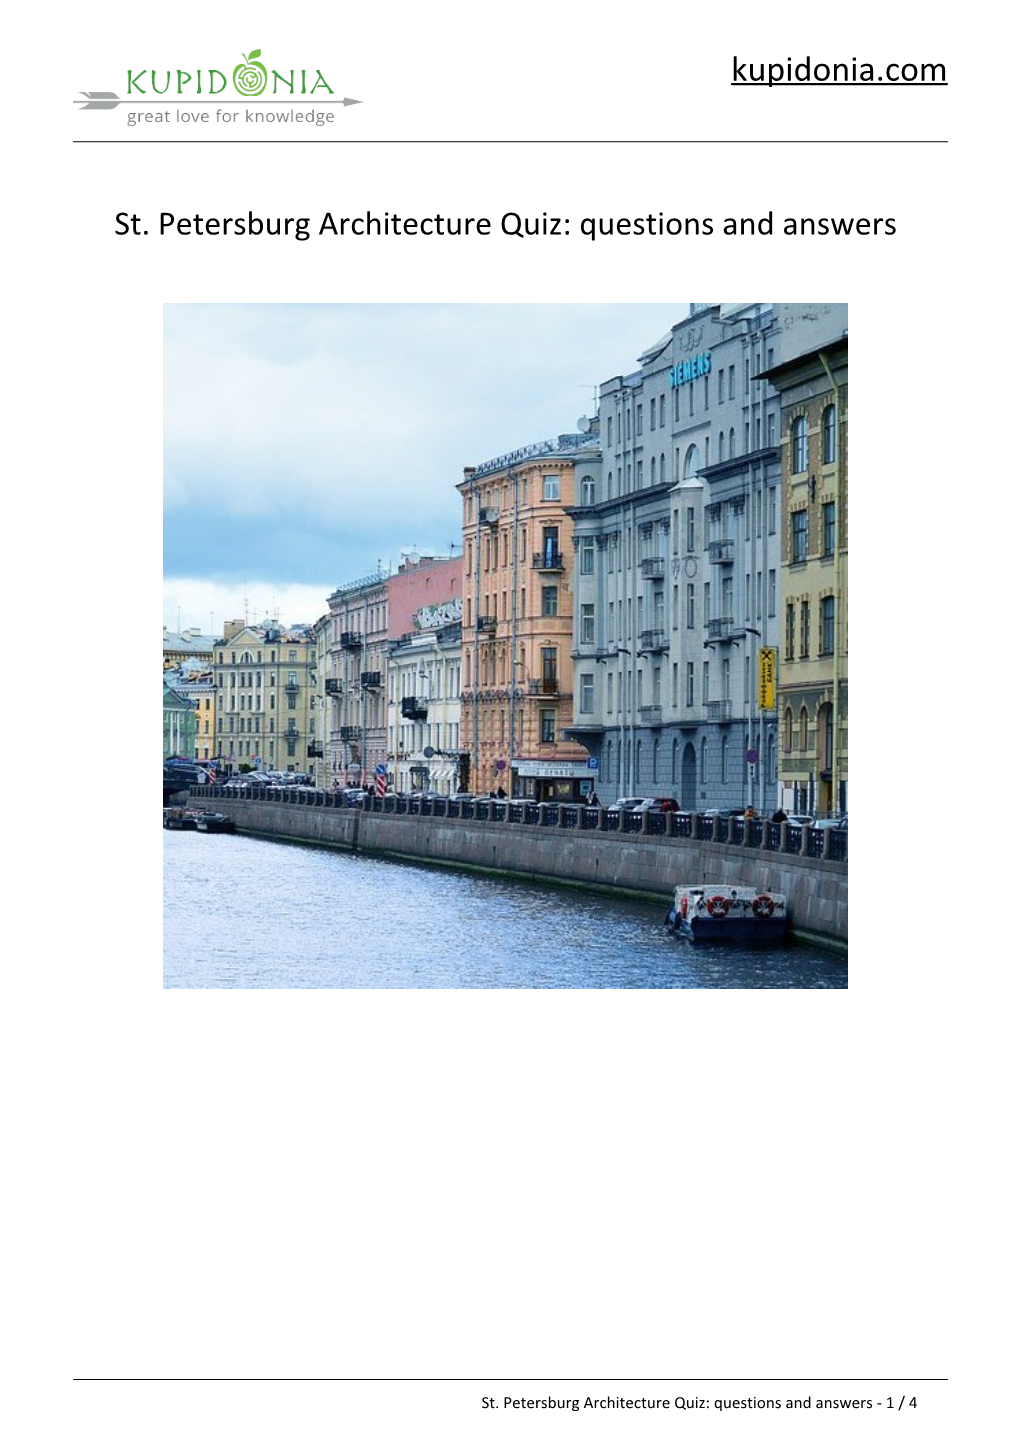 St. Petersburg Architecture Quiz: Questions and Answers